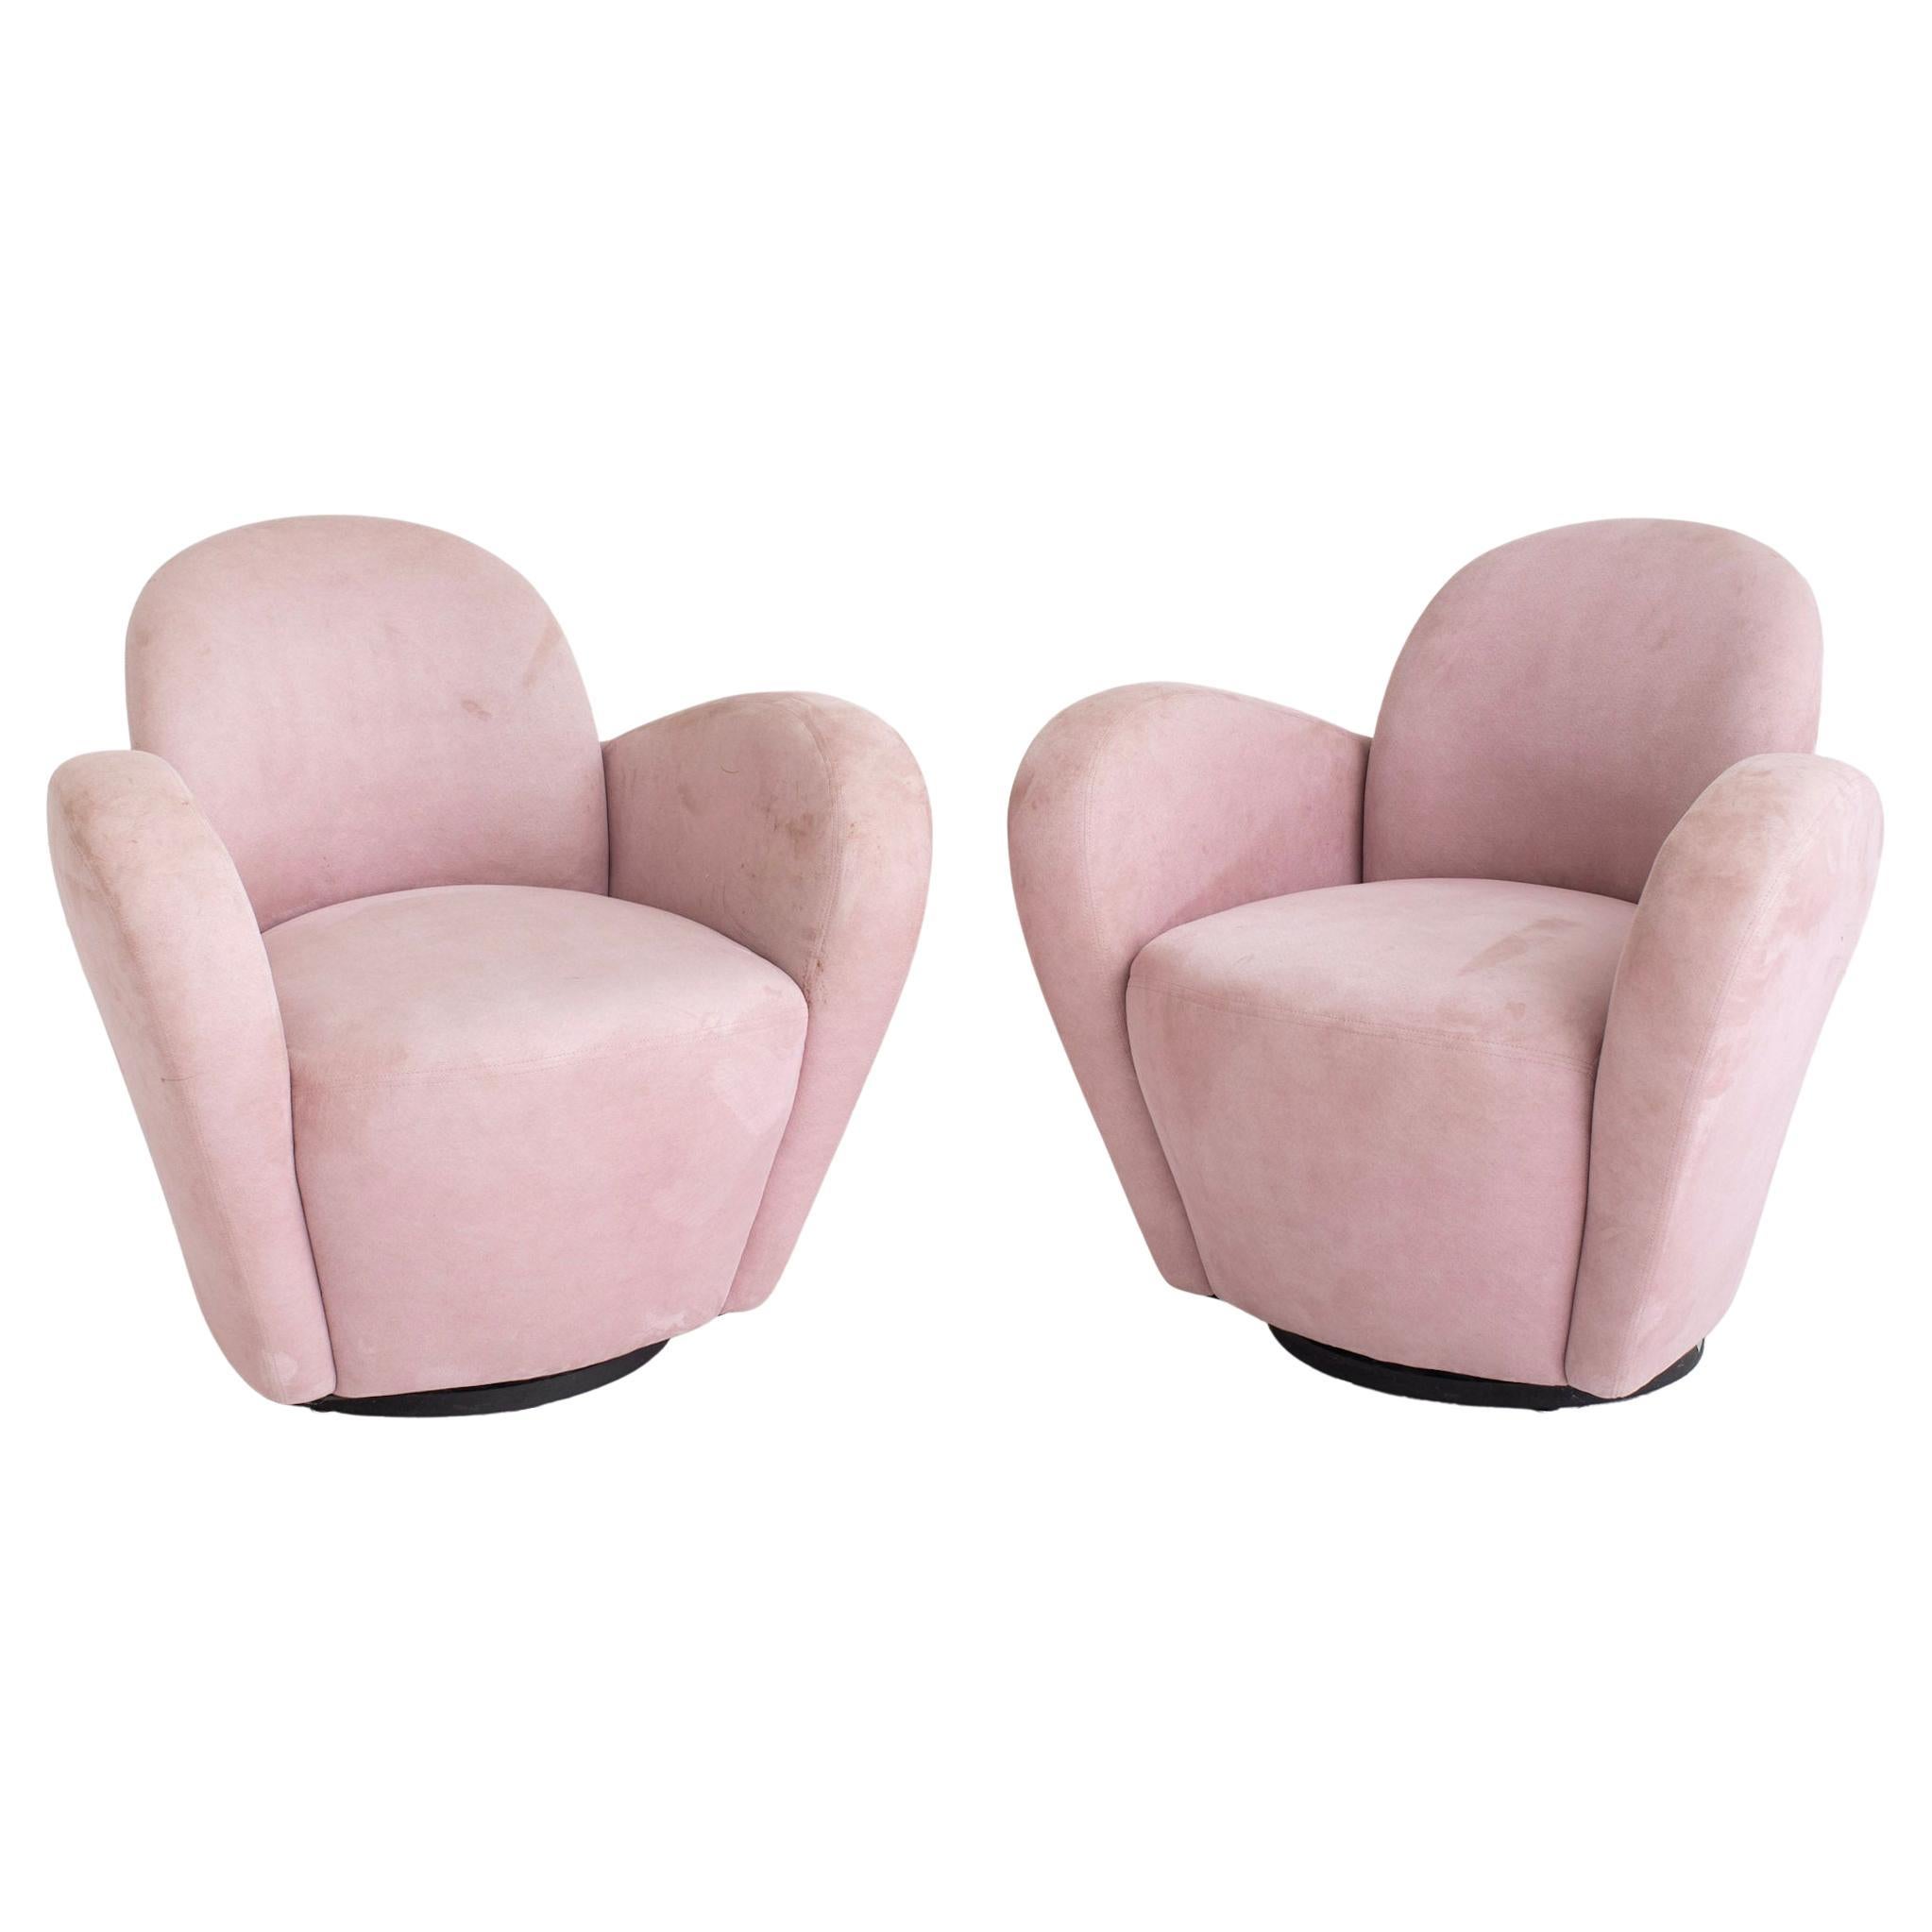 Michael Wolk "Miami" Chairs in Pink Ultra-Suede, a Pair